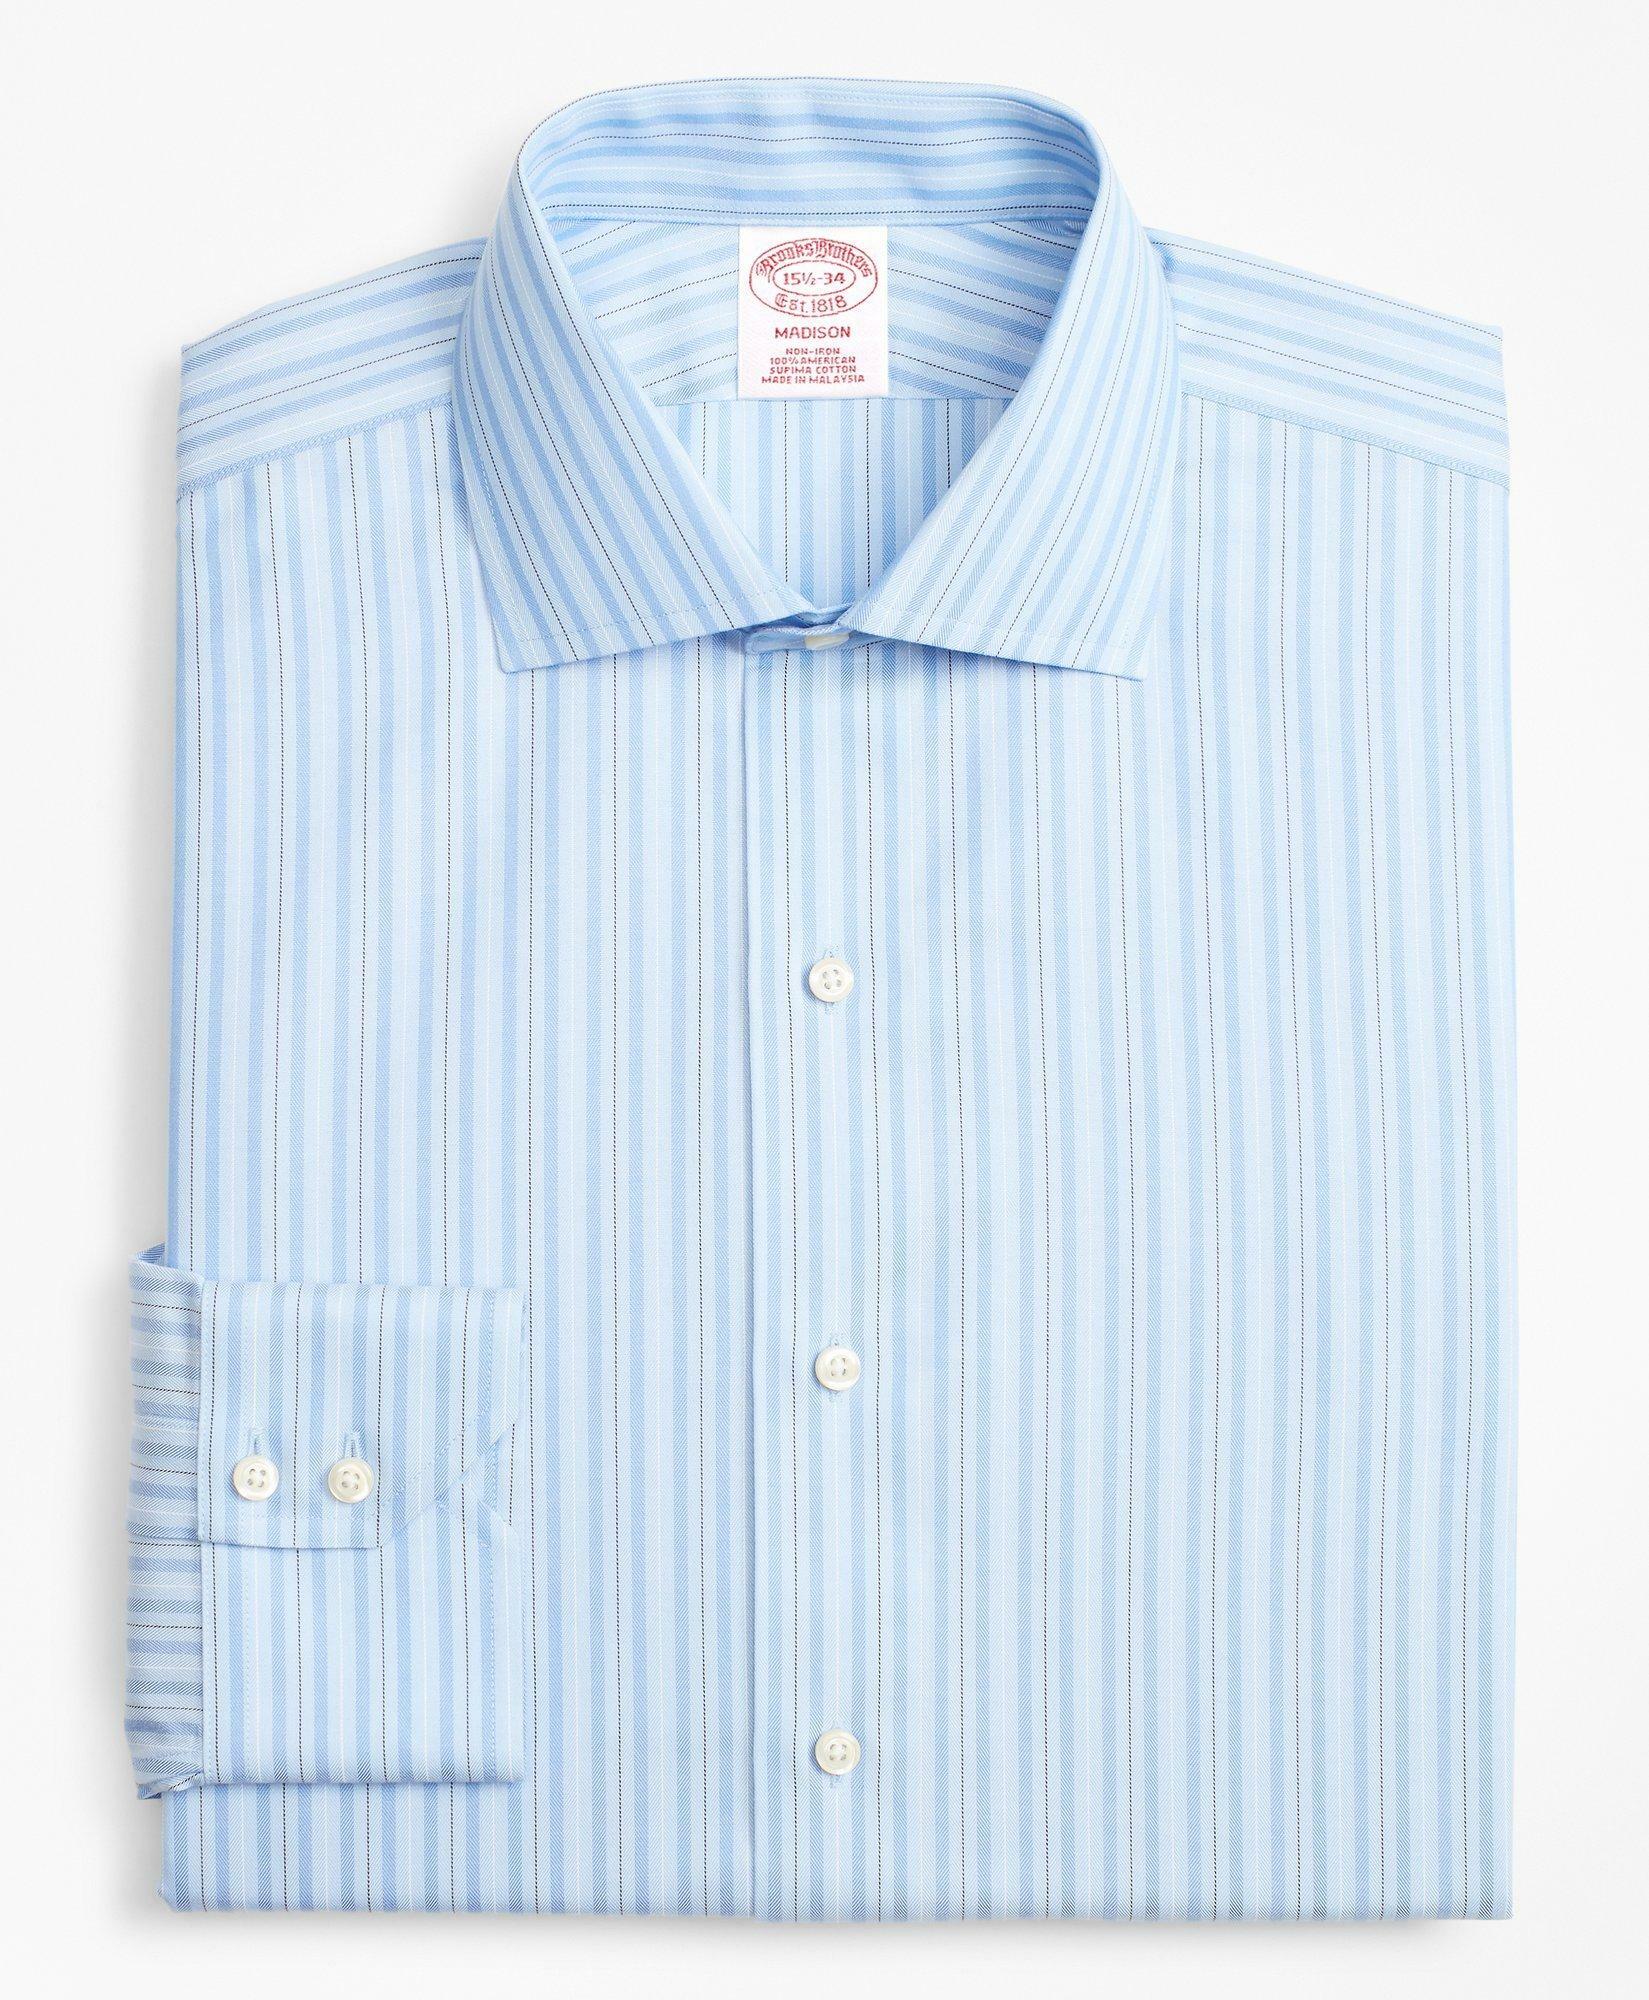 Brooks Brothers Men's Madison Relaxed-Fit Dress Shirt, Non-Iron Alternating Ground Stripe | Light Blue